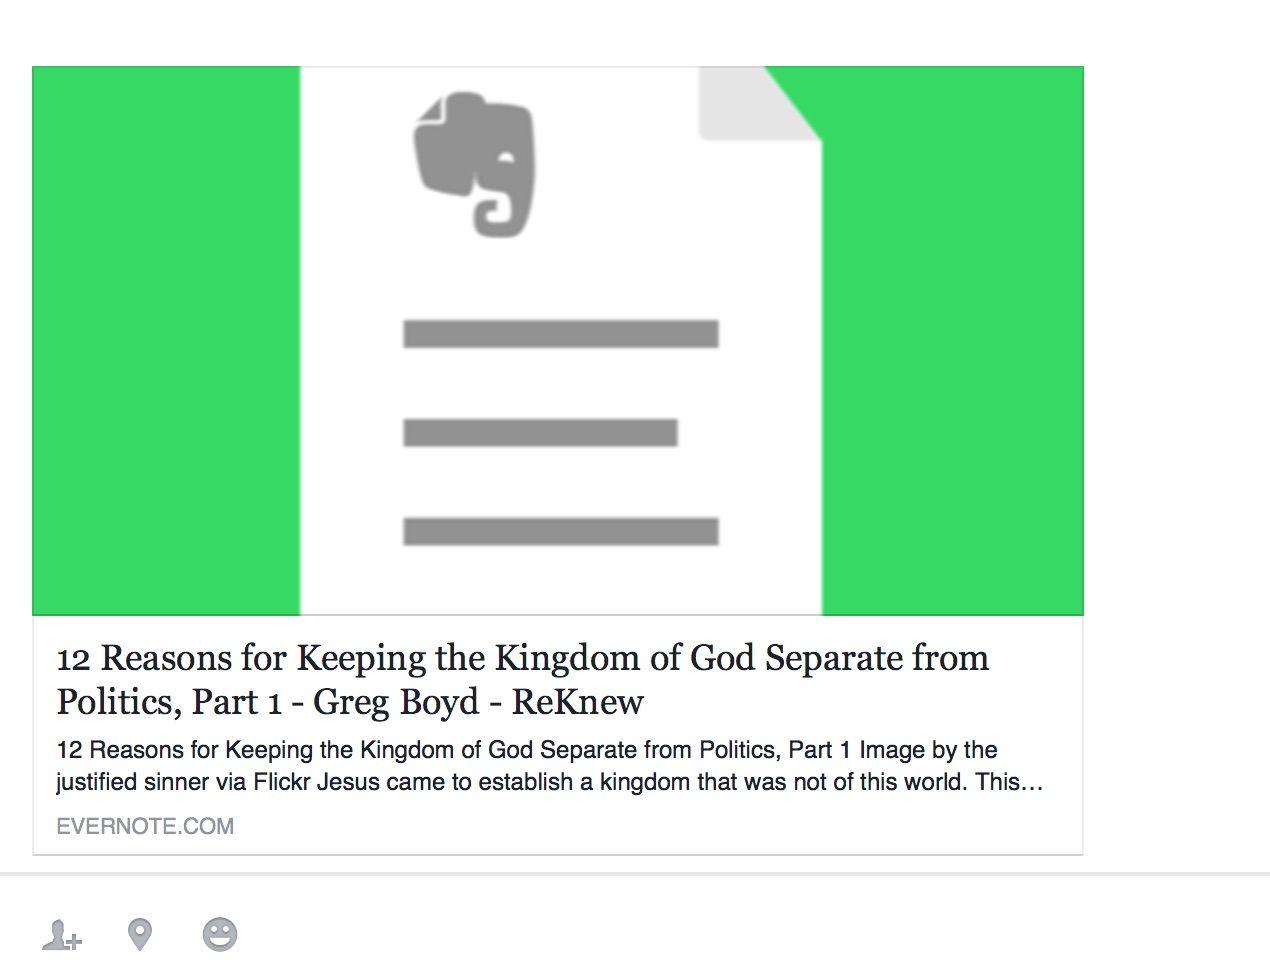 Evernote Logo - Evernote Logo in preview link of Facebook posts. for Mac